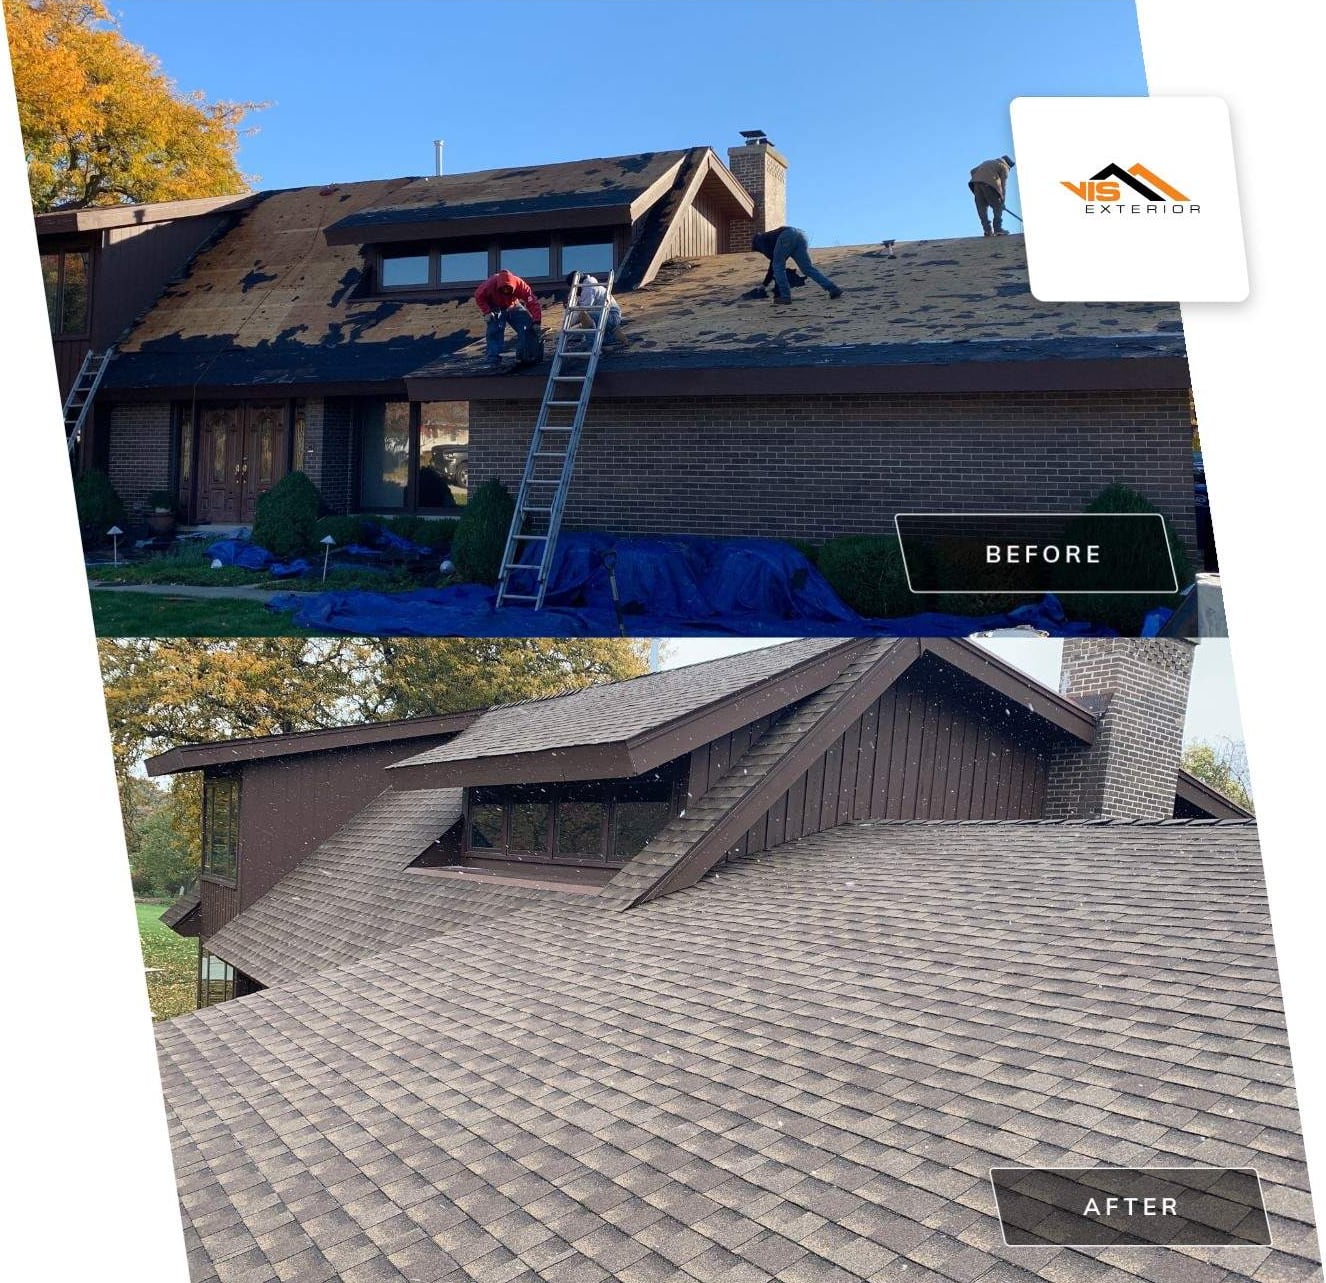 GAF shingle roof installation and guttering in Darien before after project photo